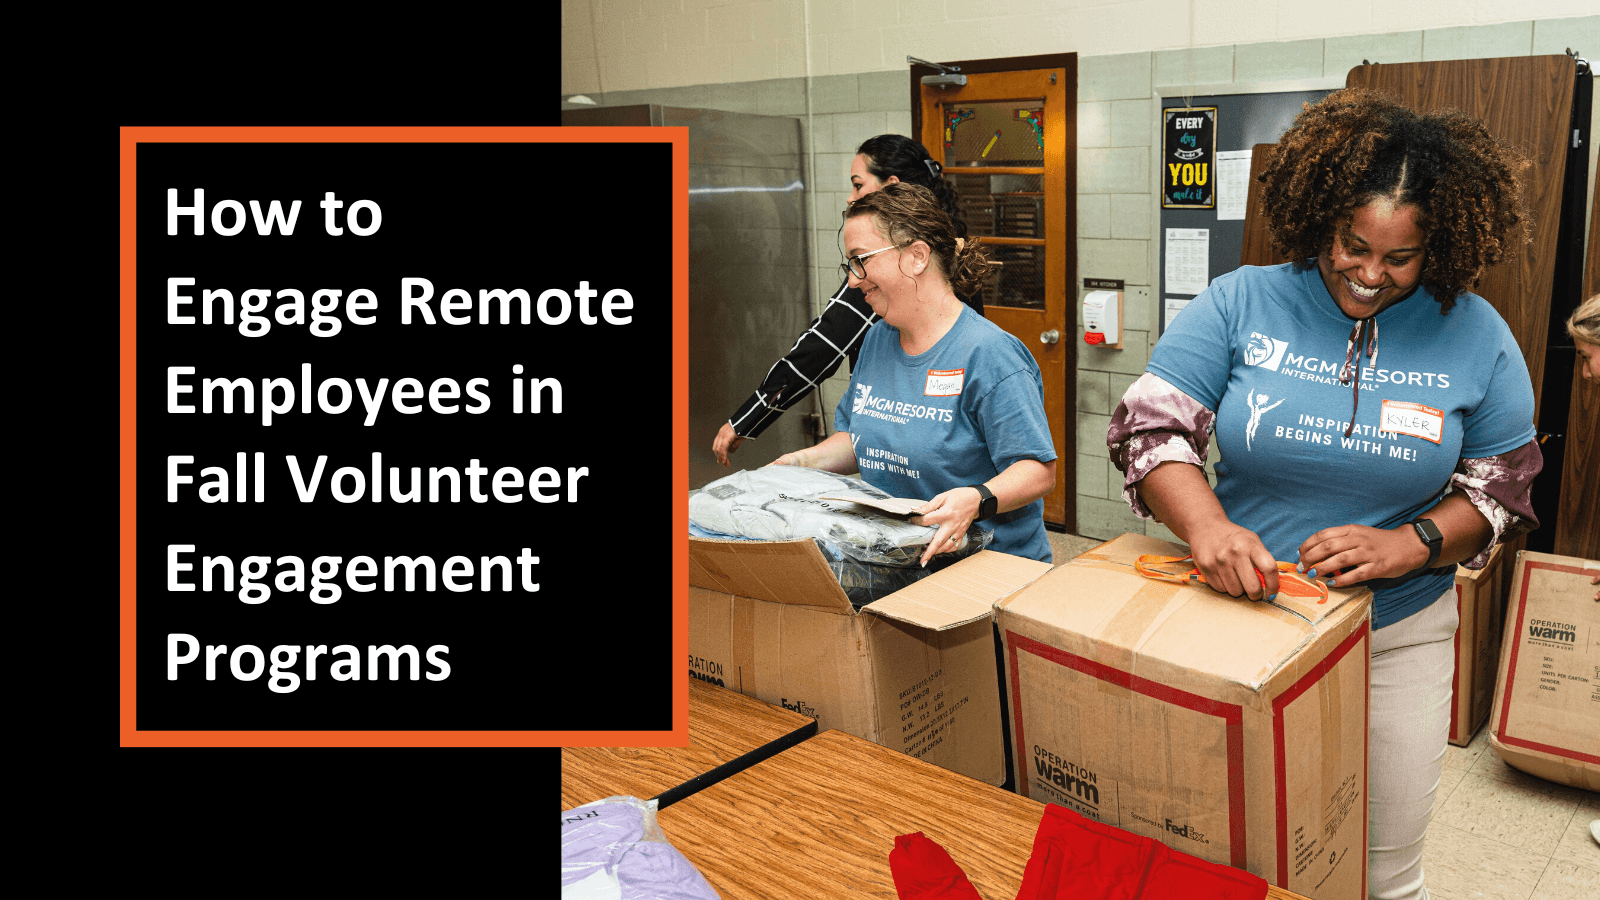 How to Engage Remote Employees in Fall Volunteer Engagement Programs